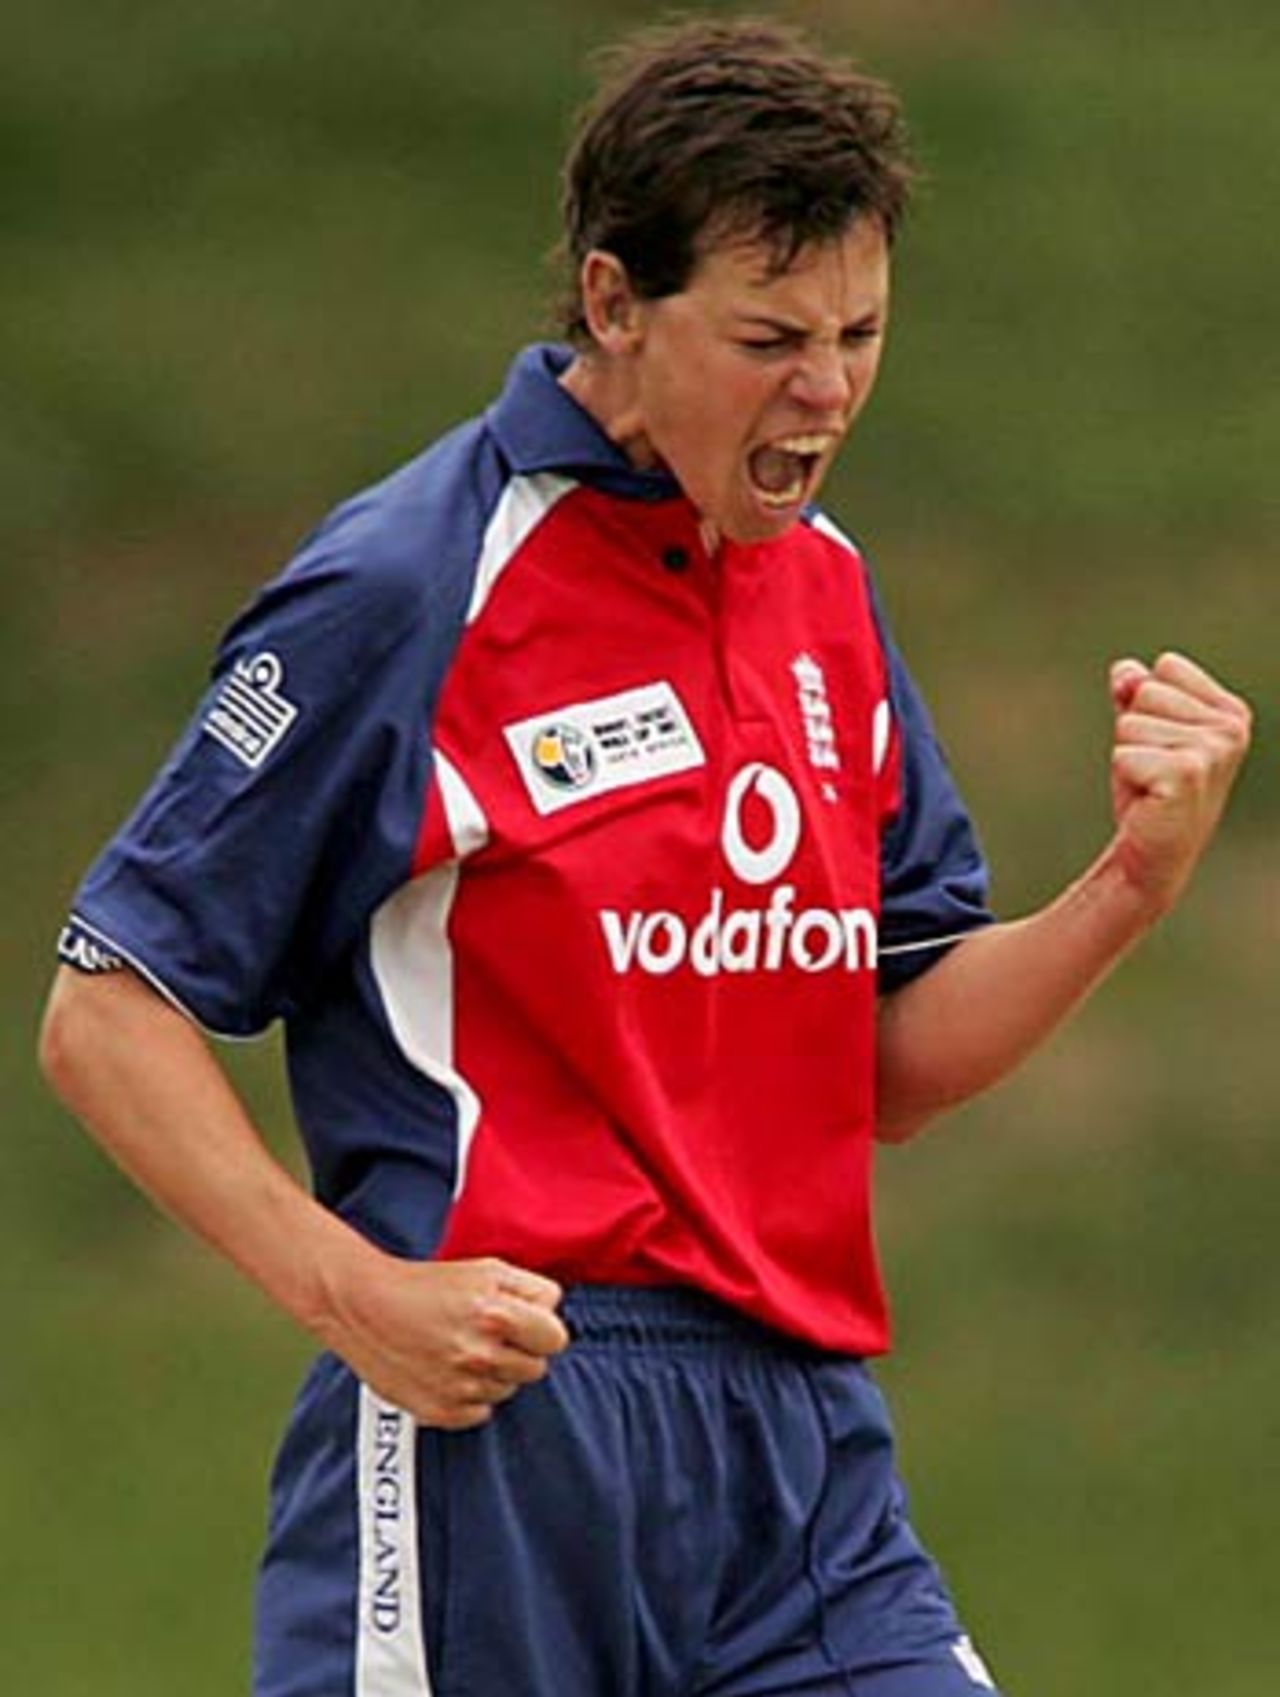 Lucy Pearson celebrates a wicket, England v South Africa, Women's World Cup, March 30, 2005